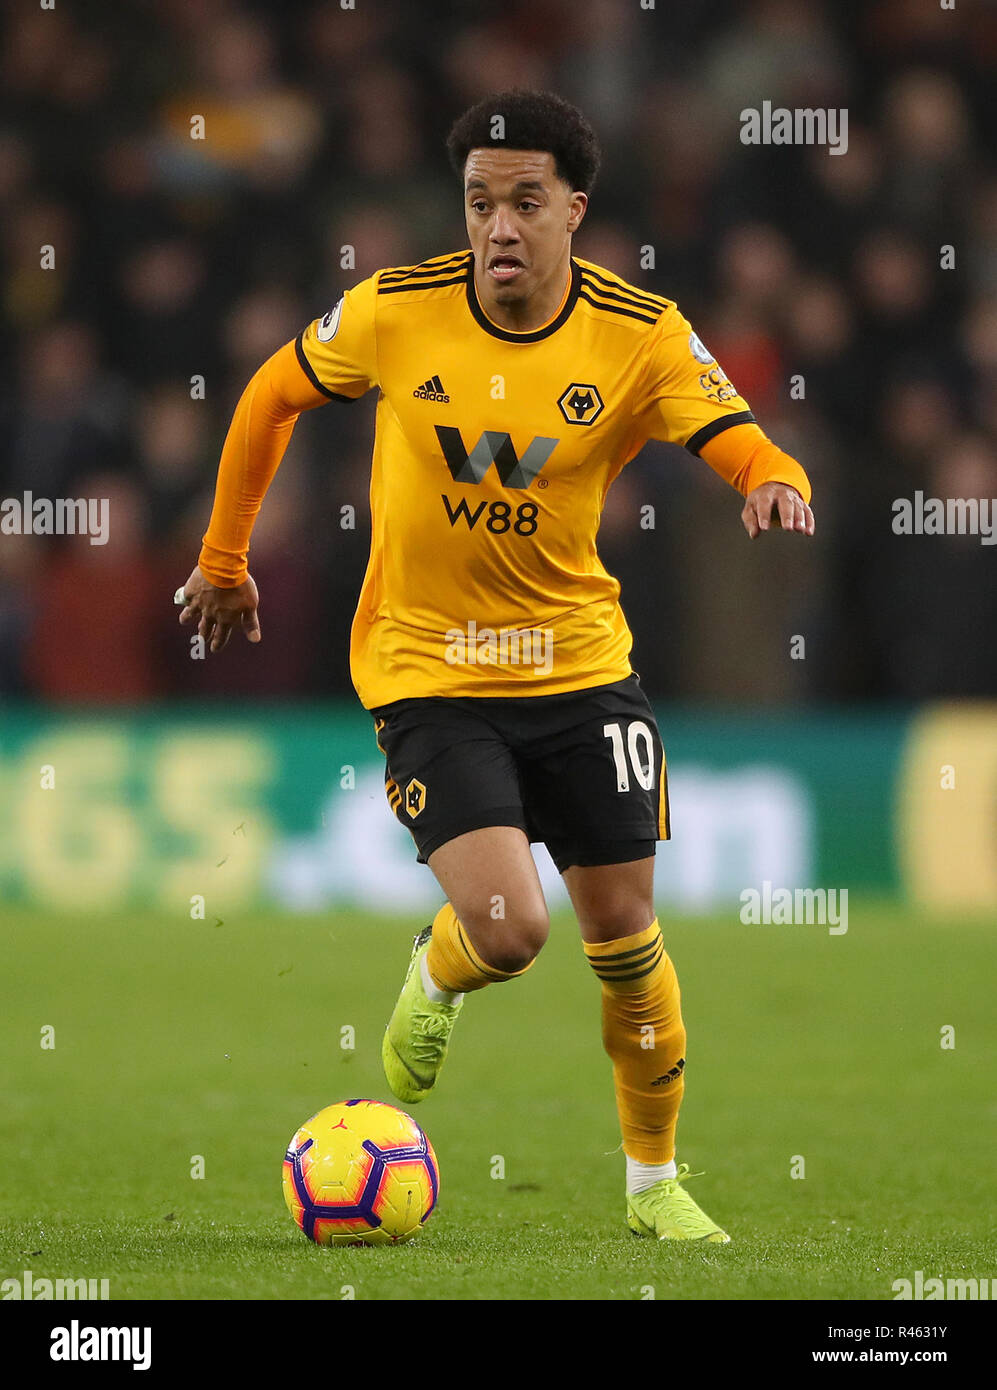 Wolverhampton Wanderers' Helder Costa during the Premier League match at Molineux, Wolverhampton. PRESS ASSOCIATION Photo. Picture date: Sunday November 25, 2018. See PA story SOCCER Wolves. Photo credit should read: Nick Potts/PA Wire. RESTRICTIONS: No use with unauthorised audio, video, data, fixture lists, club/league logos or 'live' services. Online in-match use limited to 120 images, no video emulation. No use in betting, games or single club/league/player publications. Stock Photo